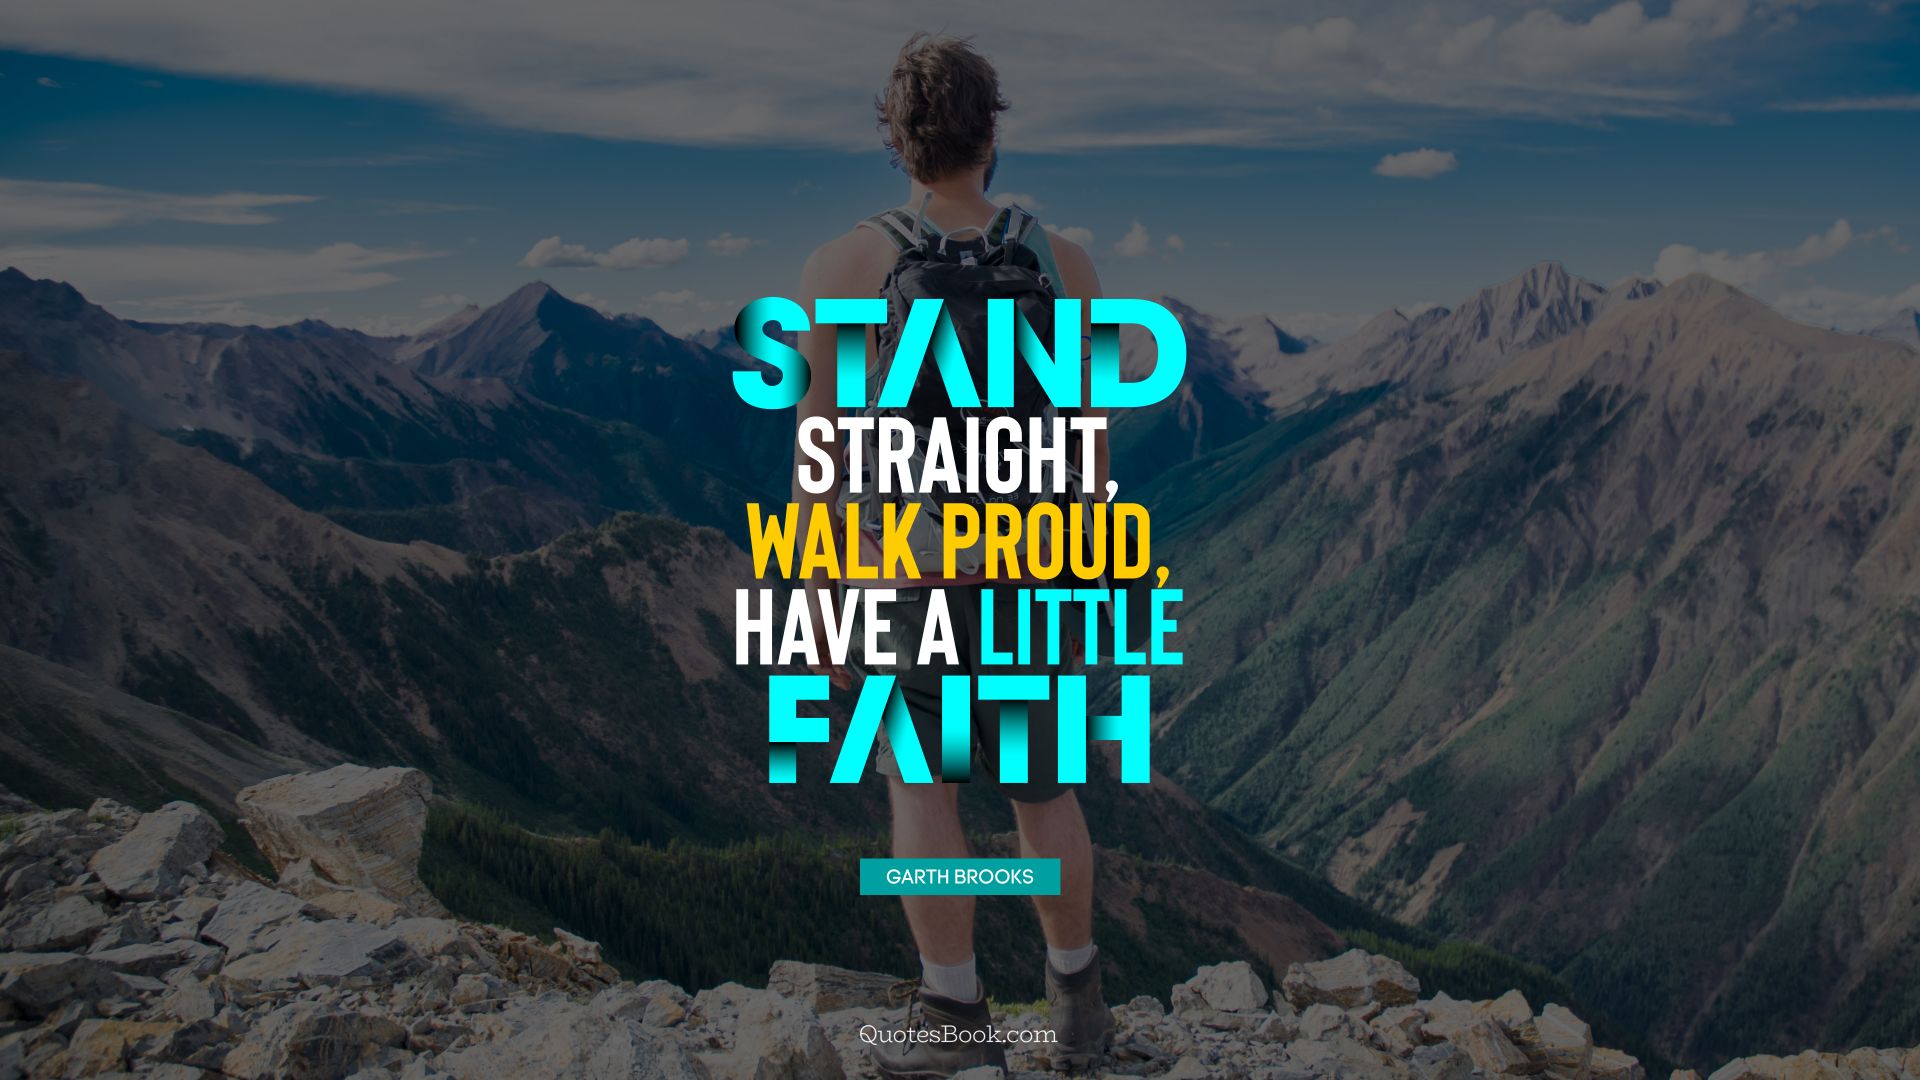 Stand straight, walk proud, have a little faith. - Quote by Garth Brooks